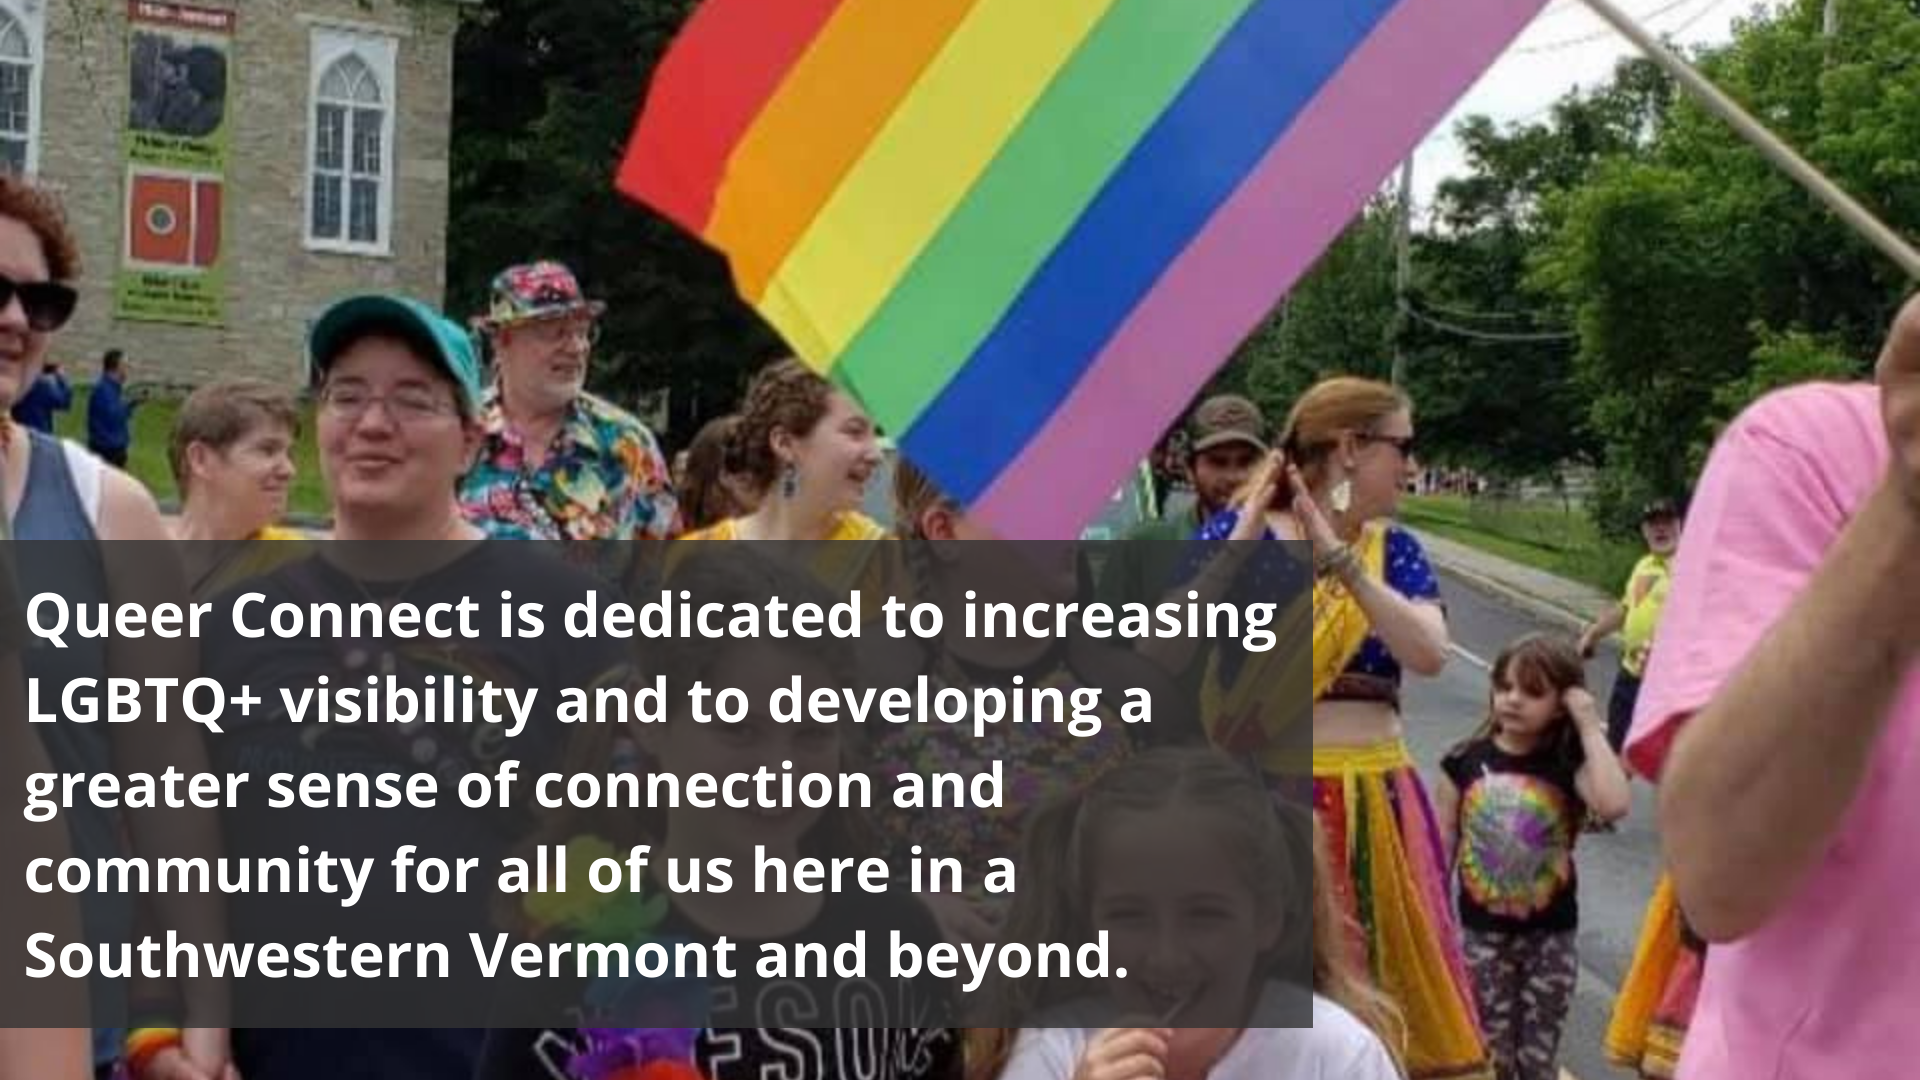 Queer Connect is dedicated to increasing LGBTQ+ visibility and to developing a greater sense of connection and community for all of us here in Southwestern Vermont and beyond.